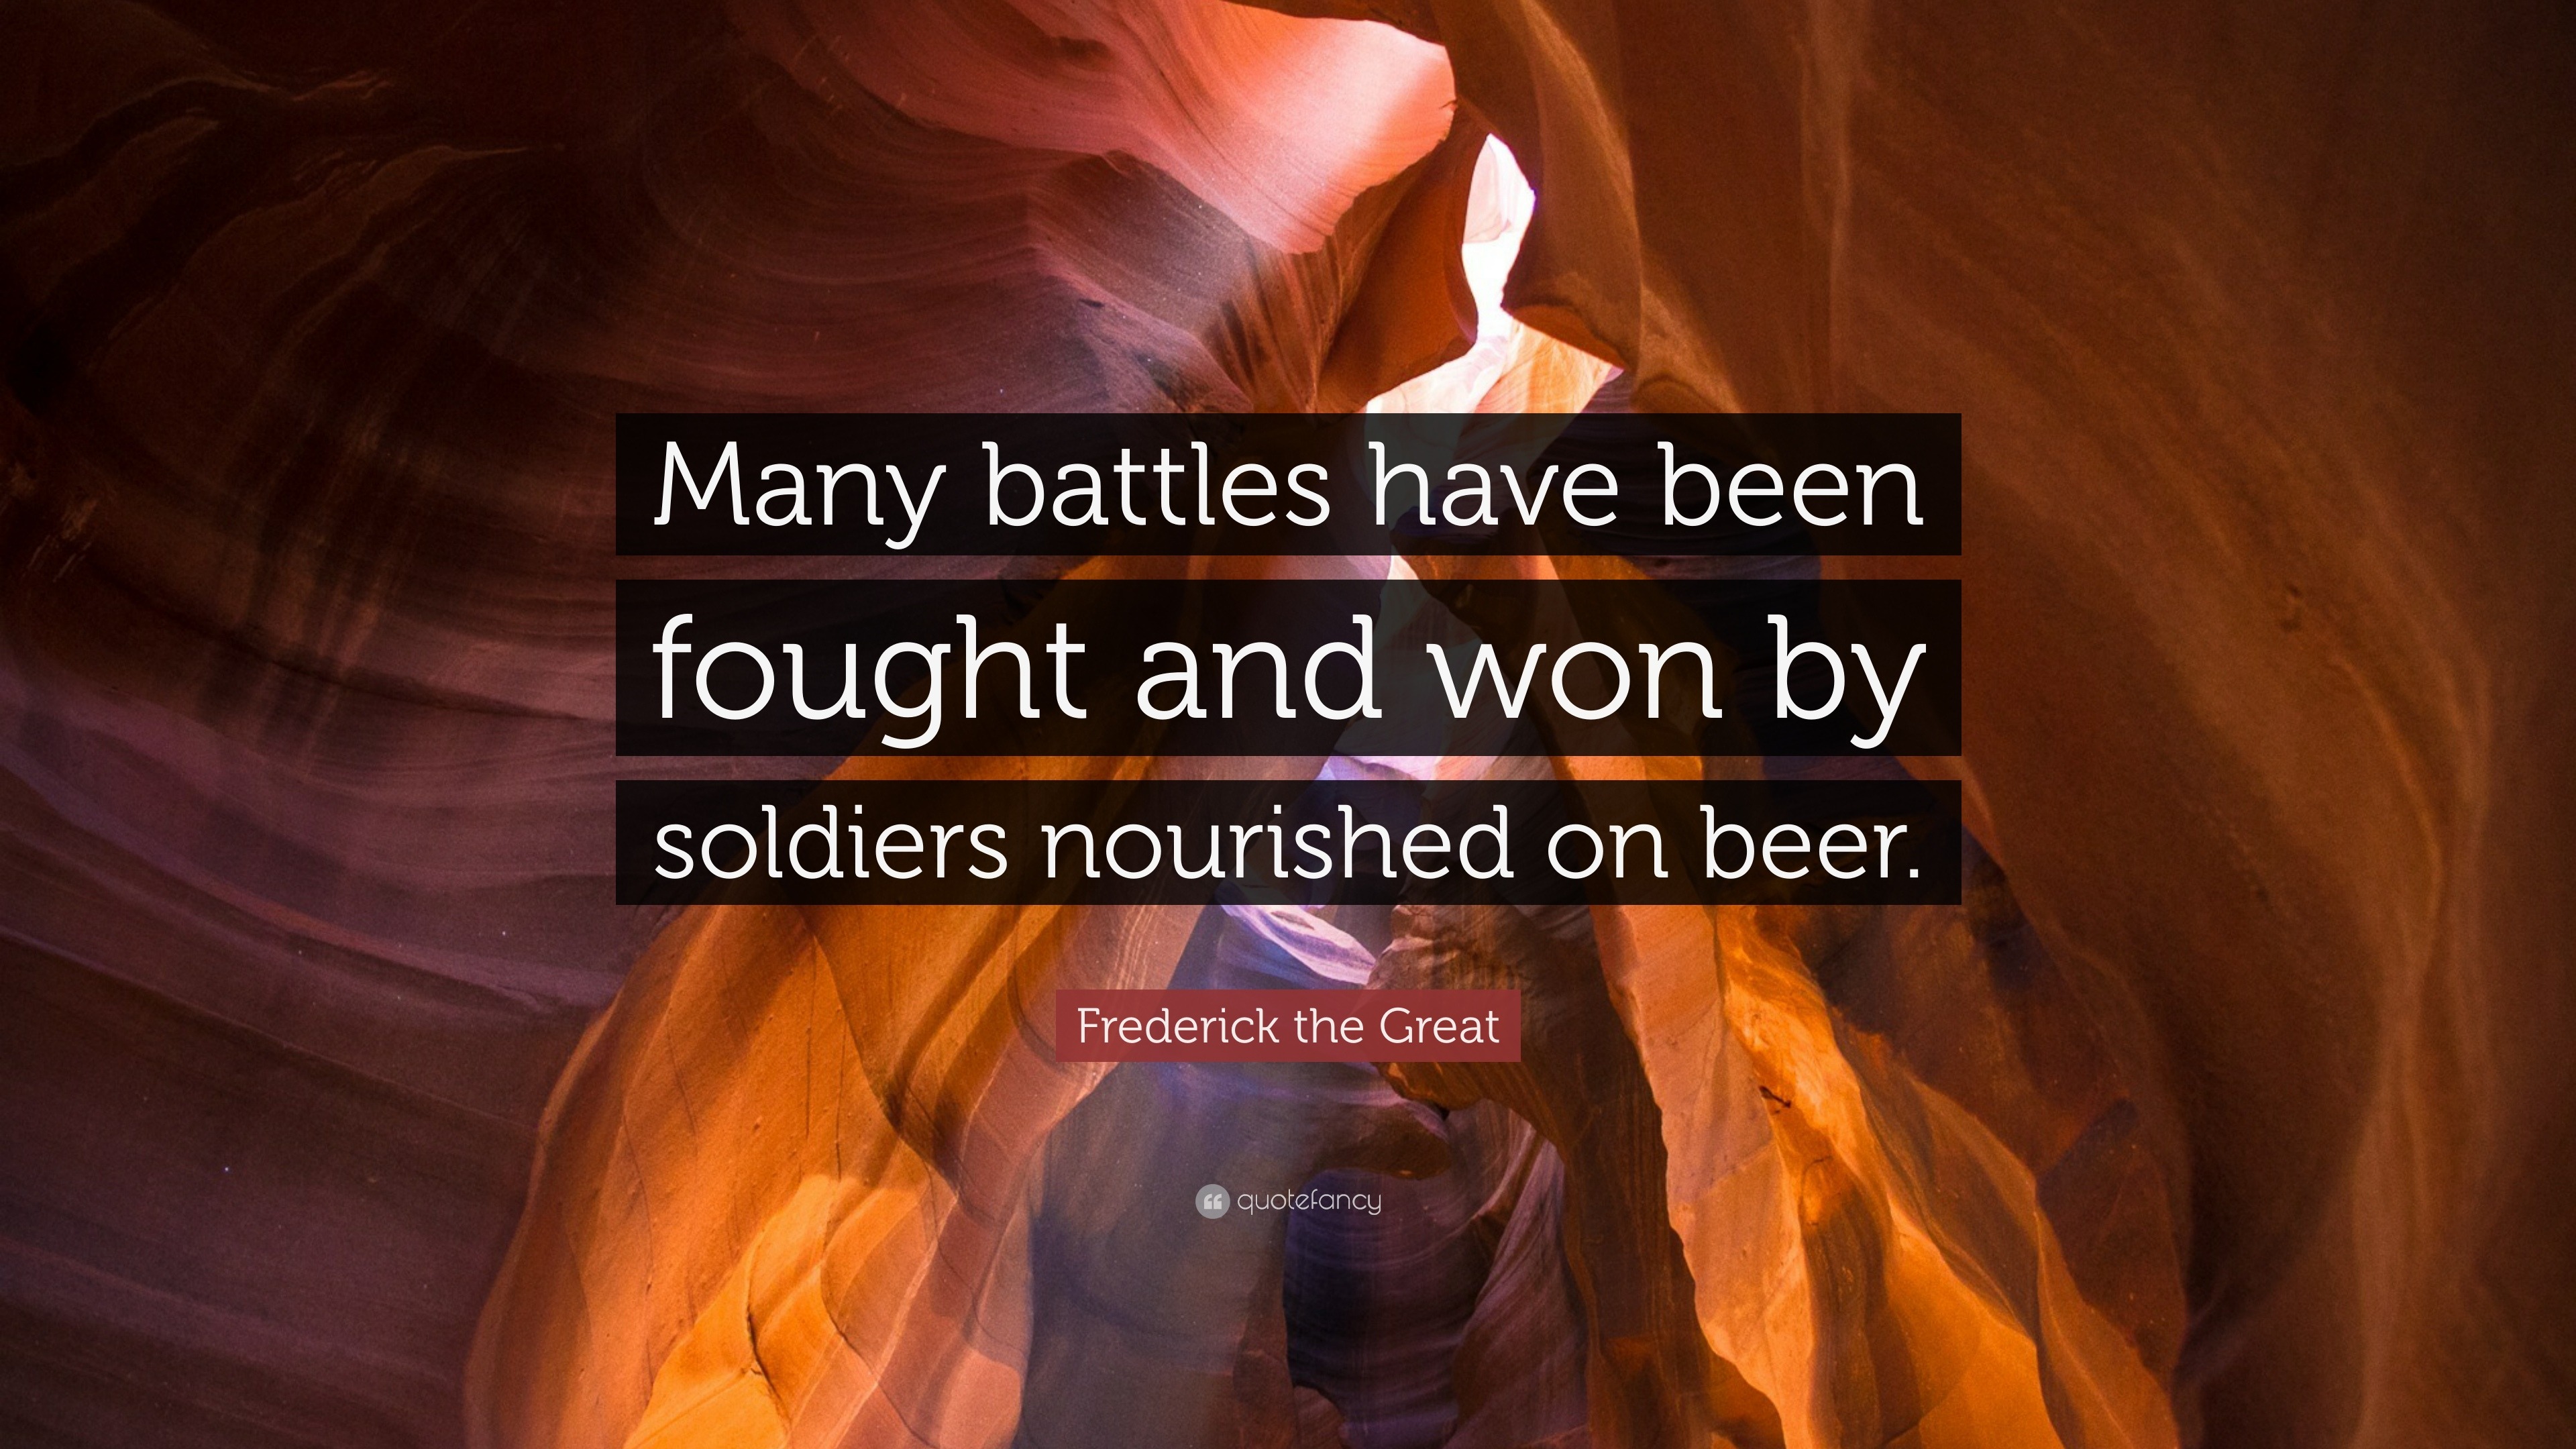 Frederick the Great Quote: “Many battles have been fought and won by ...